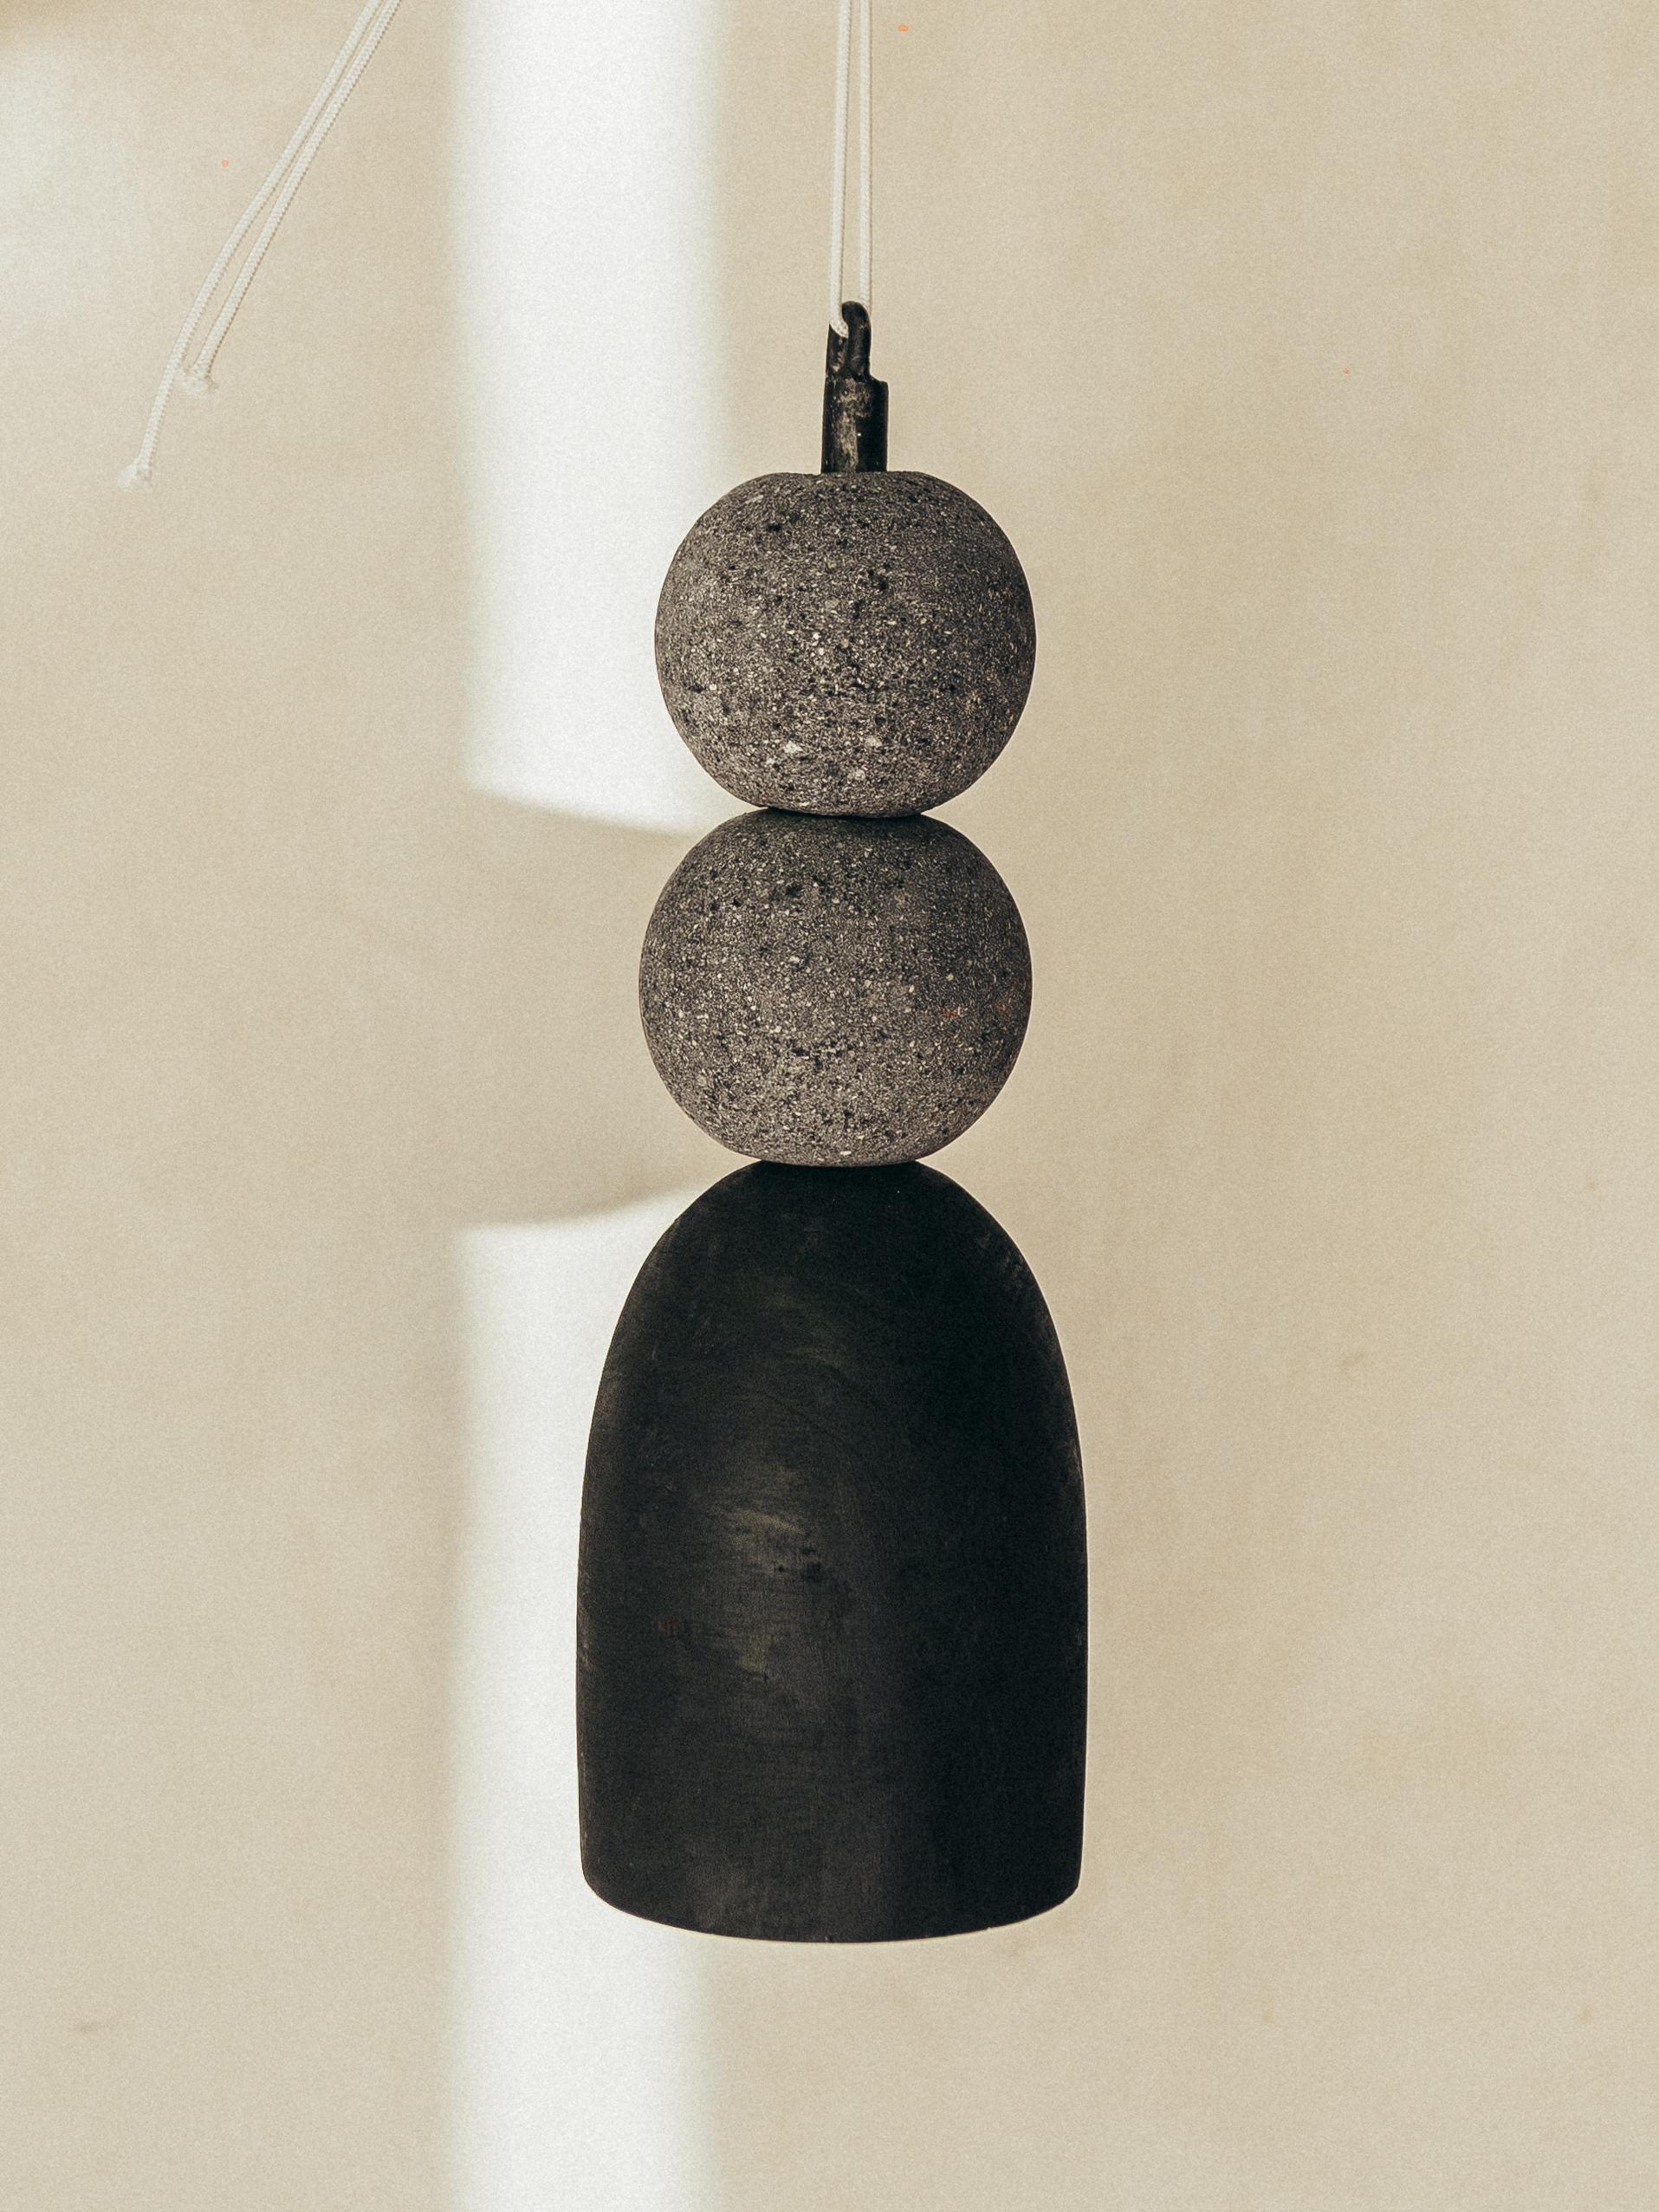 Pendant lamp with volcanic stone balls and burnt wood by Daniel Orozco.
Dimensions: D 13 x H 40 cm.
Materials: Wood, Volcanic Stone.

All our lamps can be wired according to each country. If sold to the USA it will be wired for the USA for